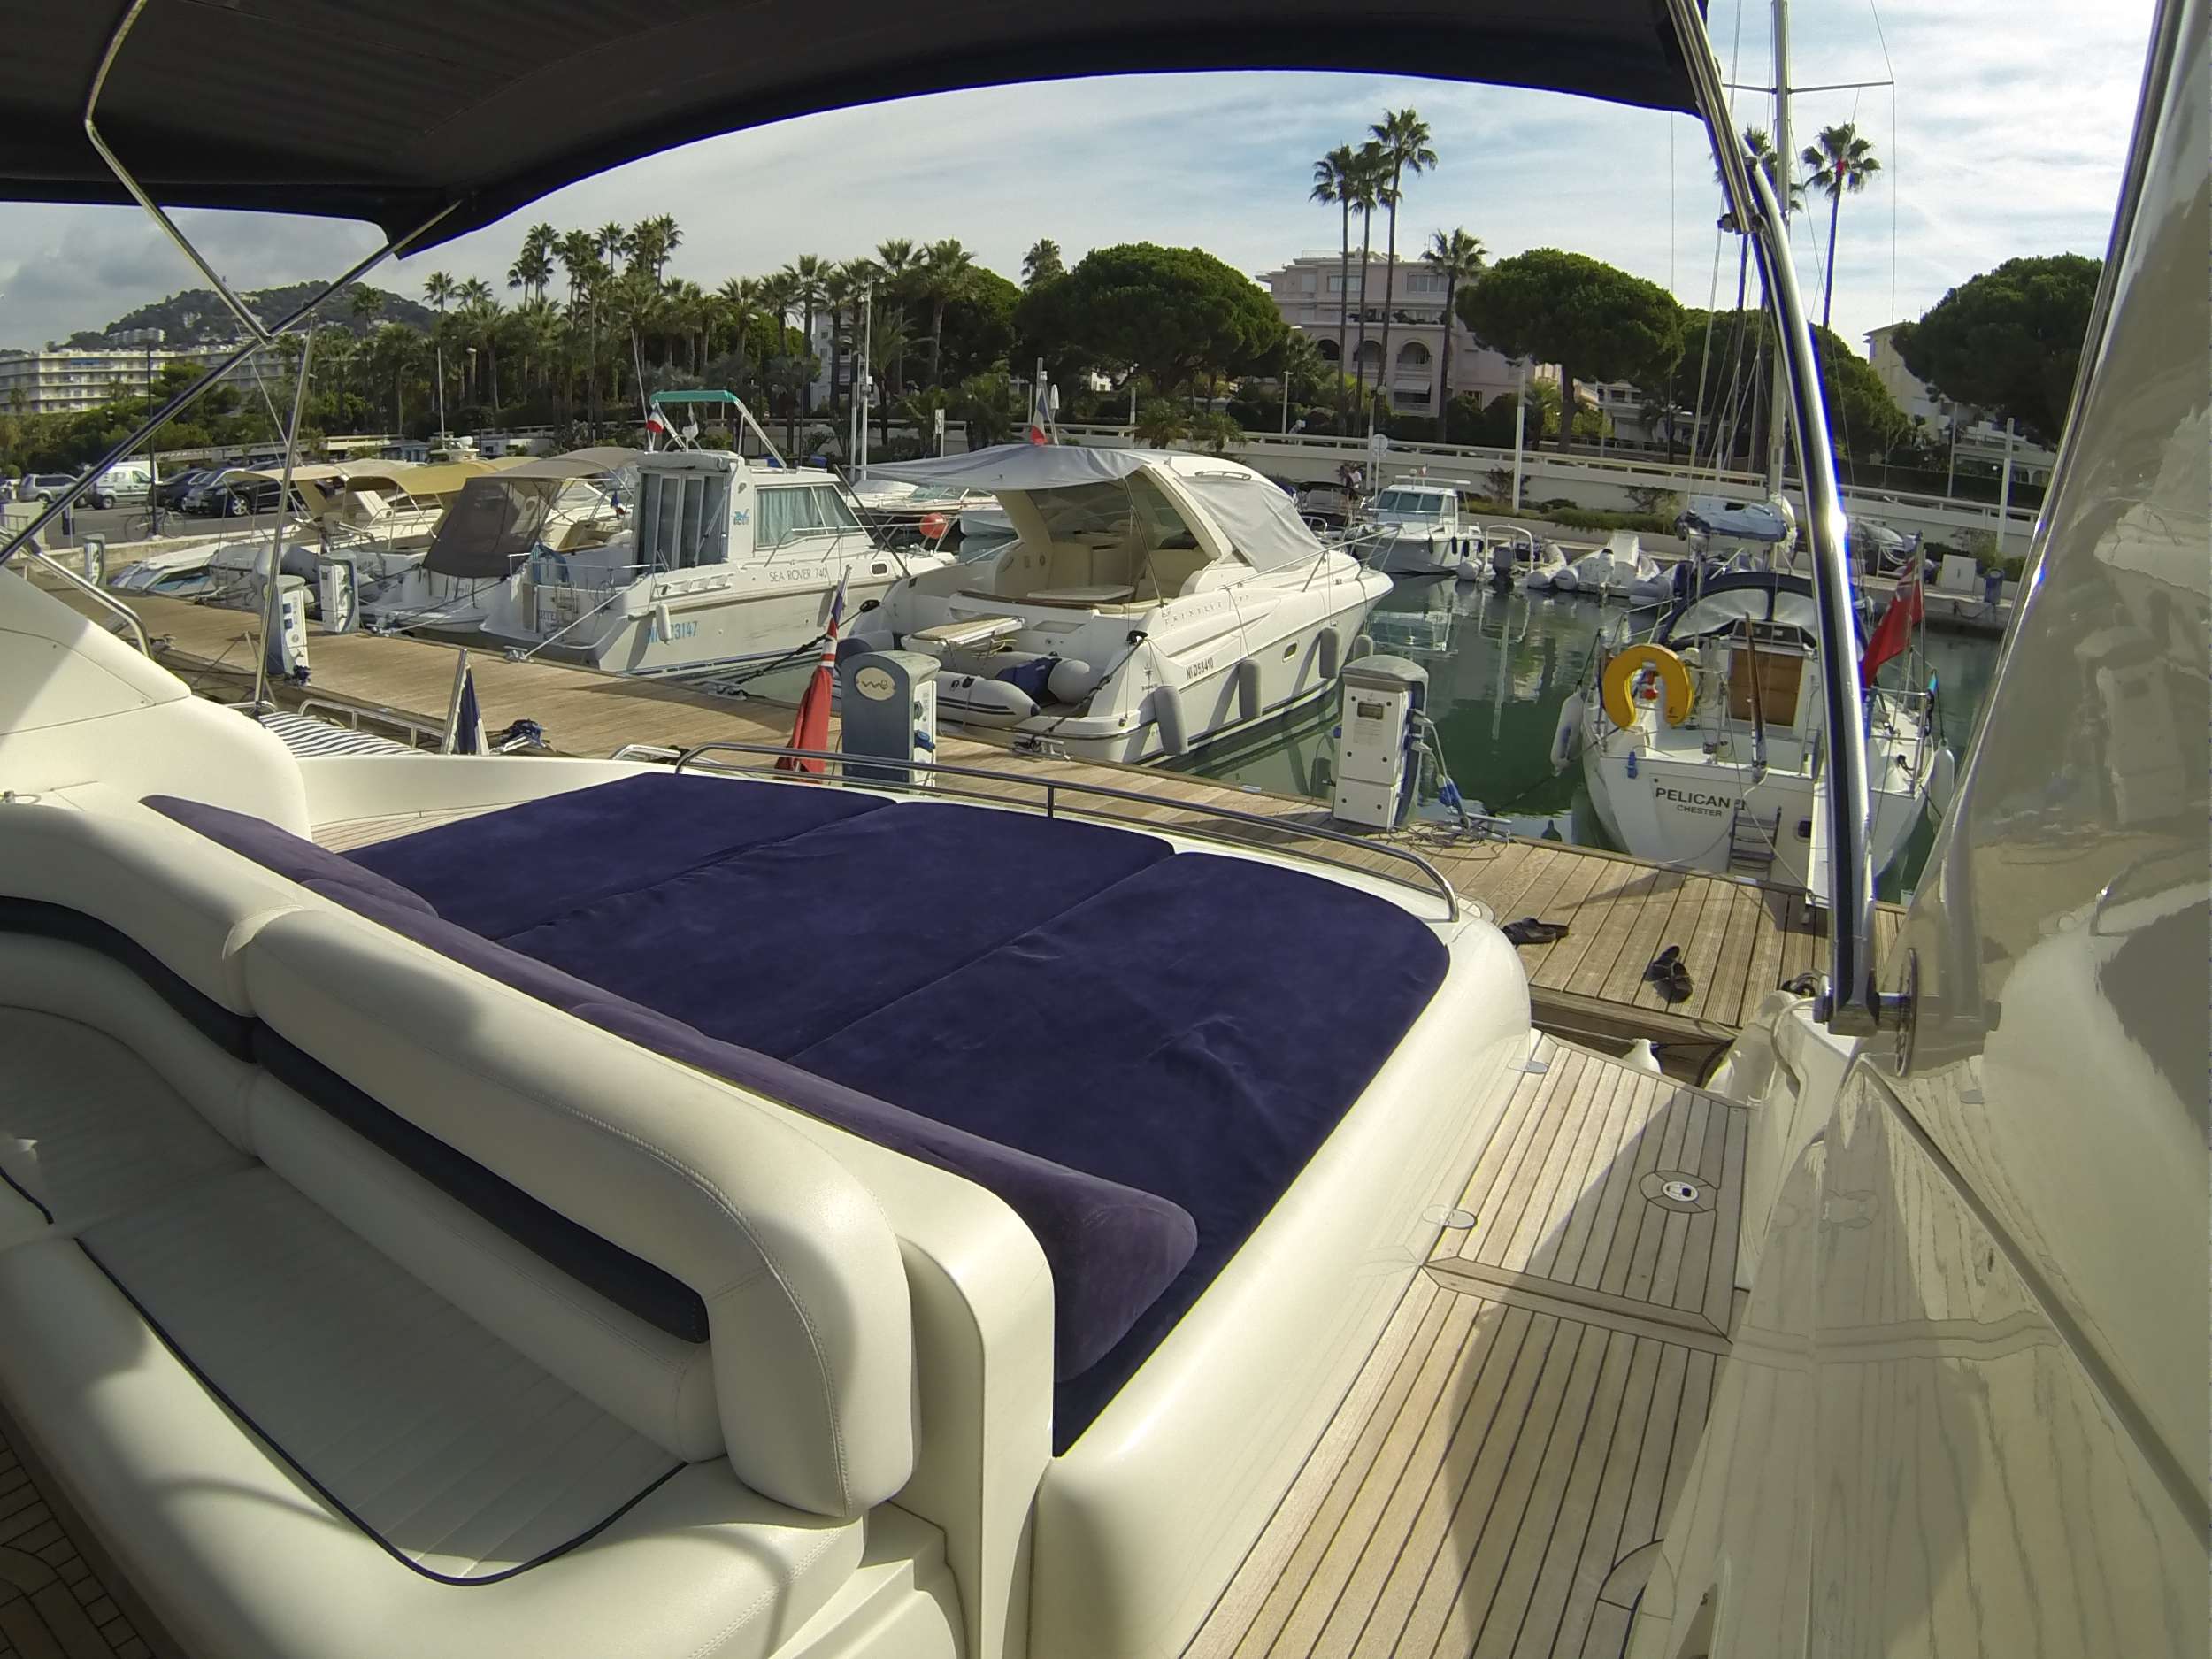 Anthinea - Yacht Charter Antibes & Boat hire in Fr. Riviera, Corsica & Sardinia 4